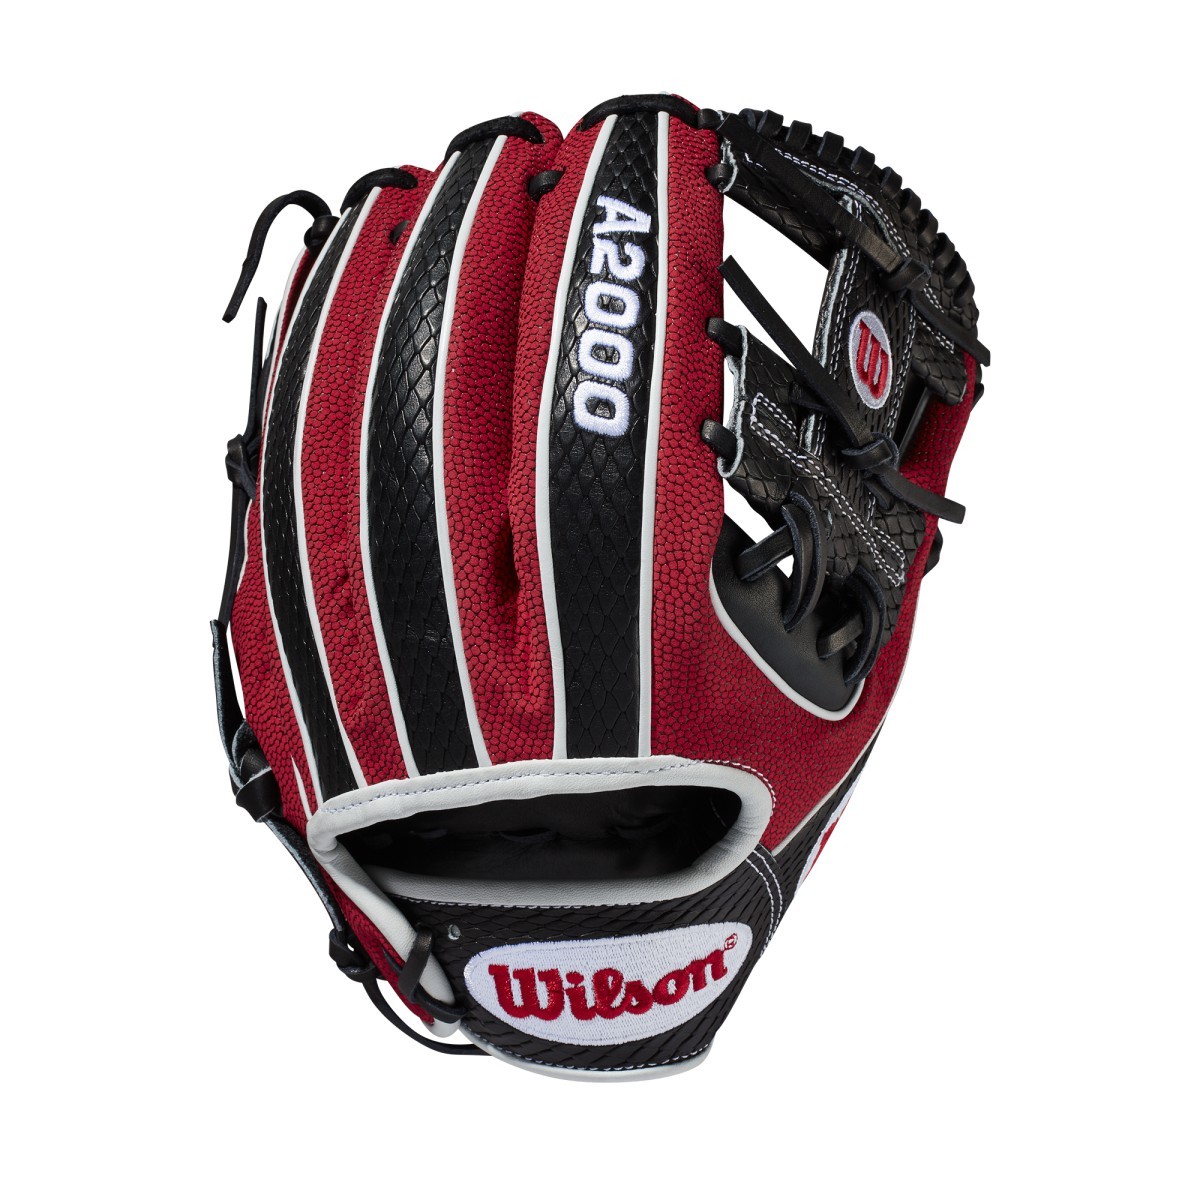 Snakeskin-printed Pro Stock Leather returns to the Glove of the Month in this fiery A2000 1786SS design. With Black SnakeSkin style Pro Stock Leather and Red SuperSkin, this glove is unlike anything we've ever created - calling it hot doesn't even come close to doing it justice. Each month, Wilson unveils a new A2K or A2000 Glove of the Month -- a unique limited-edition Pro Stock ball glove available only in-store from select dealers. Past Glove of the Month gloves have included player customs, one-of-a kind models and fan-designed contest winners. A portion of the proceeds go to Pitch in for Baseball, a longtime Wilson charity partner.